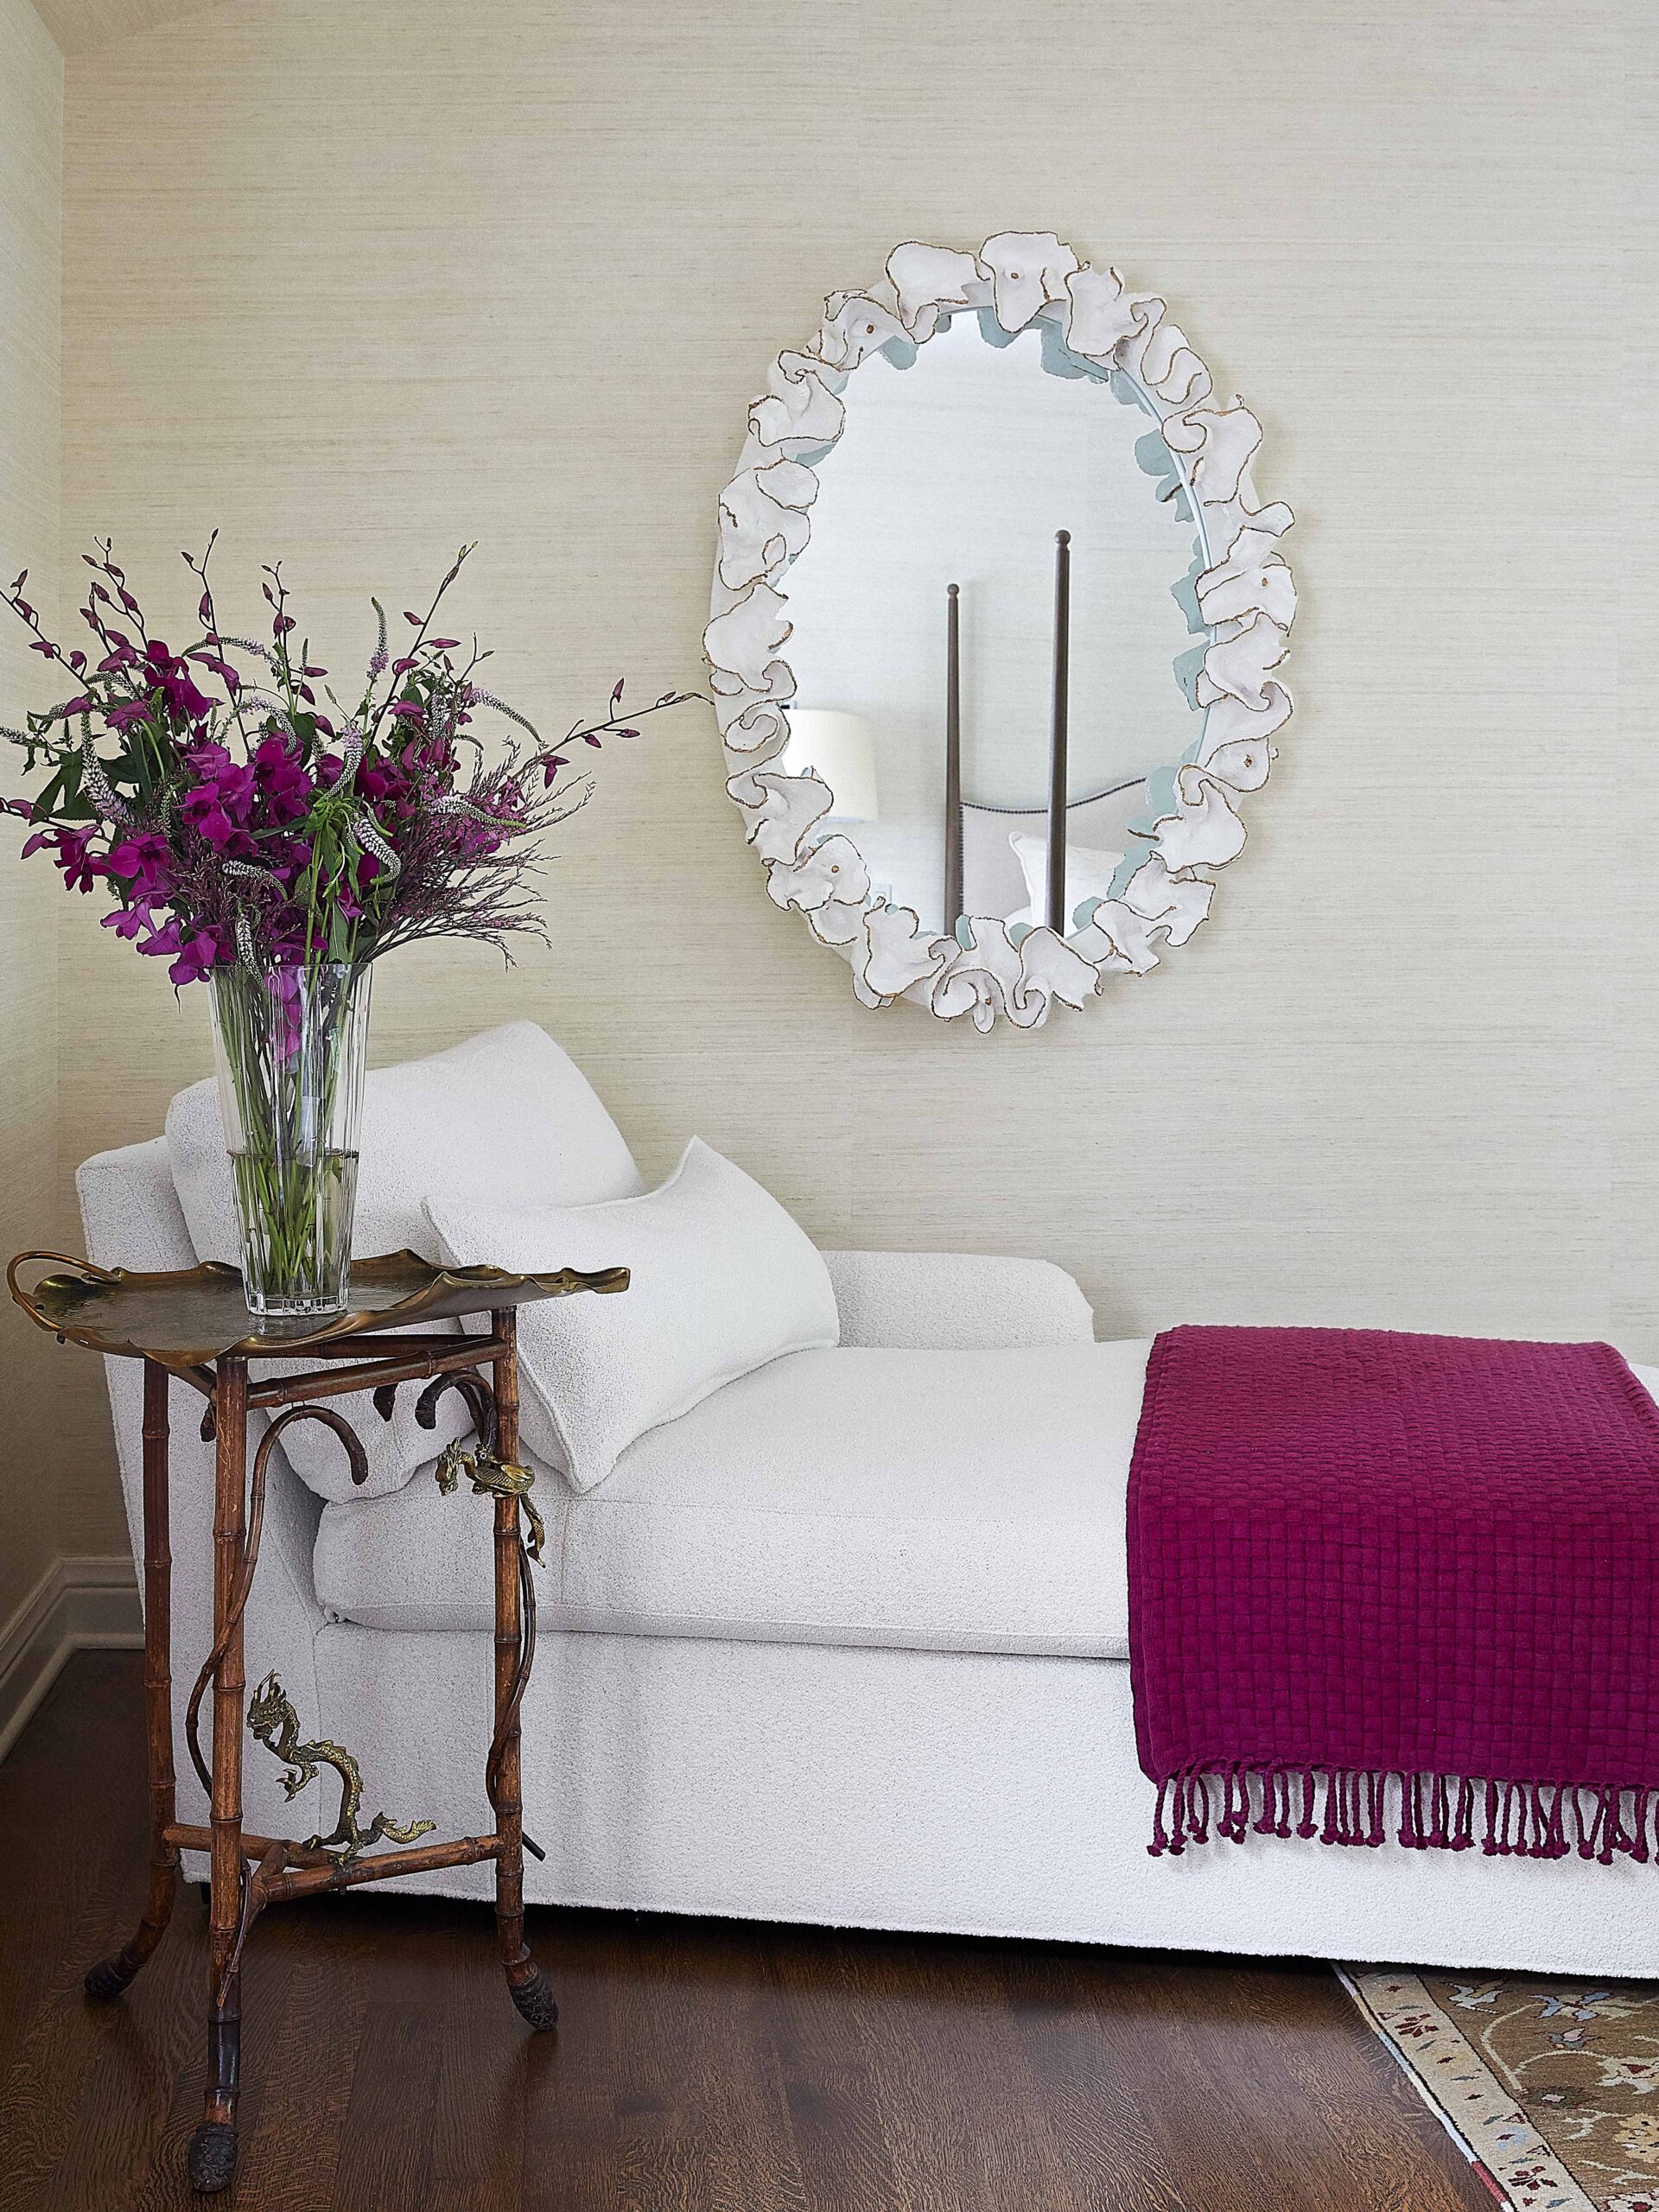 Chaise lounge area in bedroom with ruffled mirror design